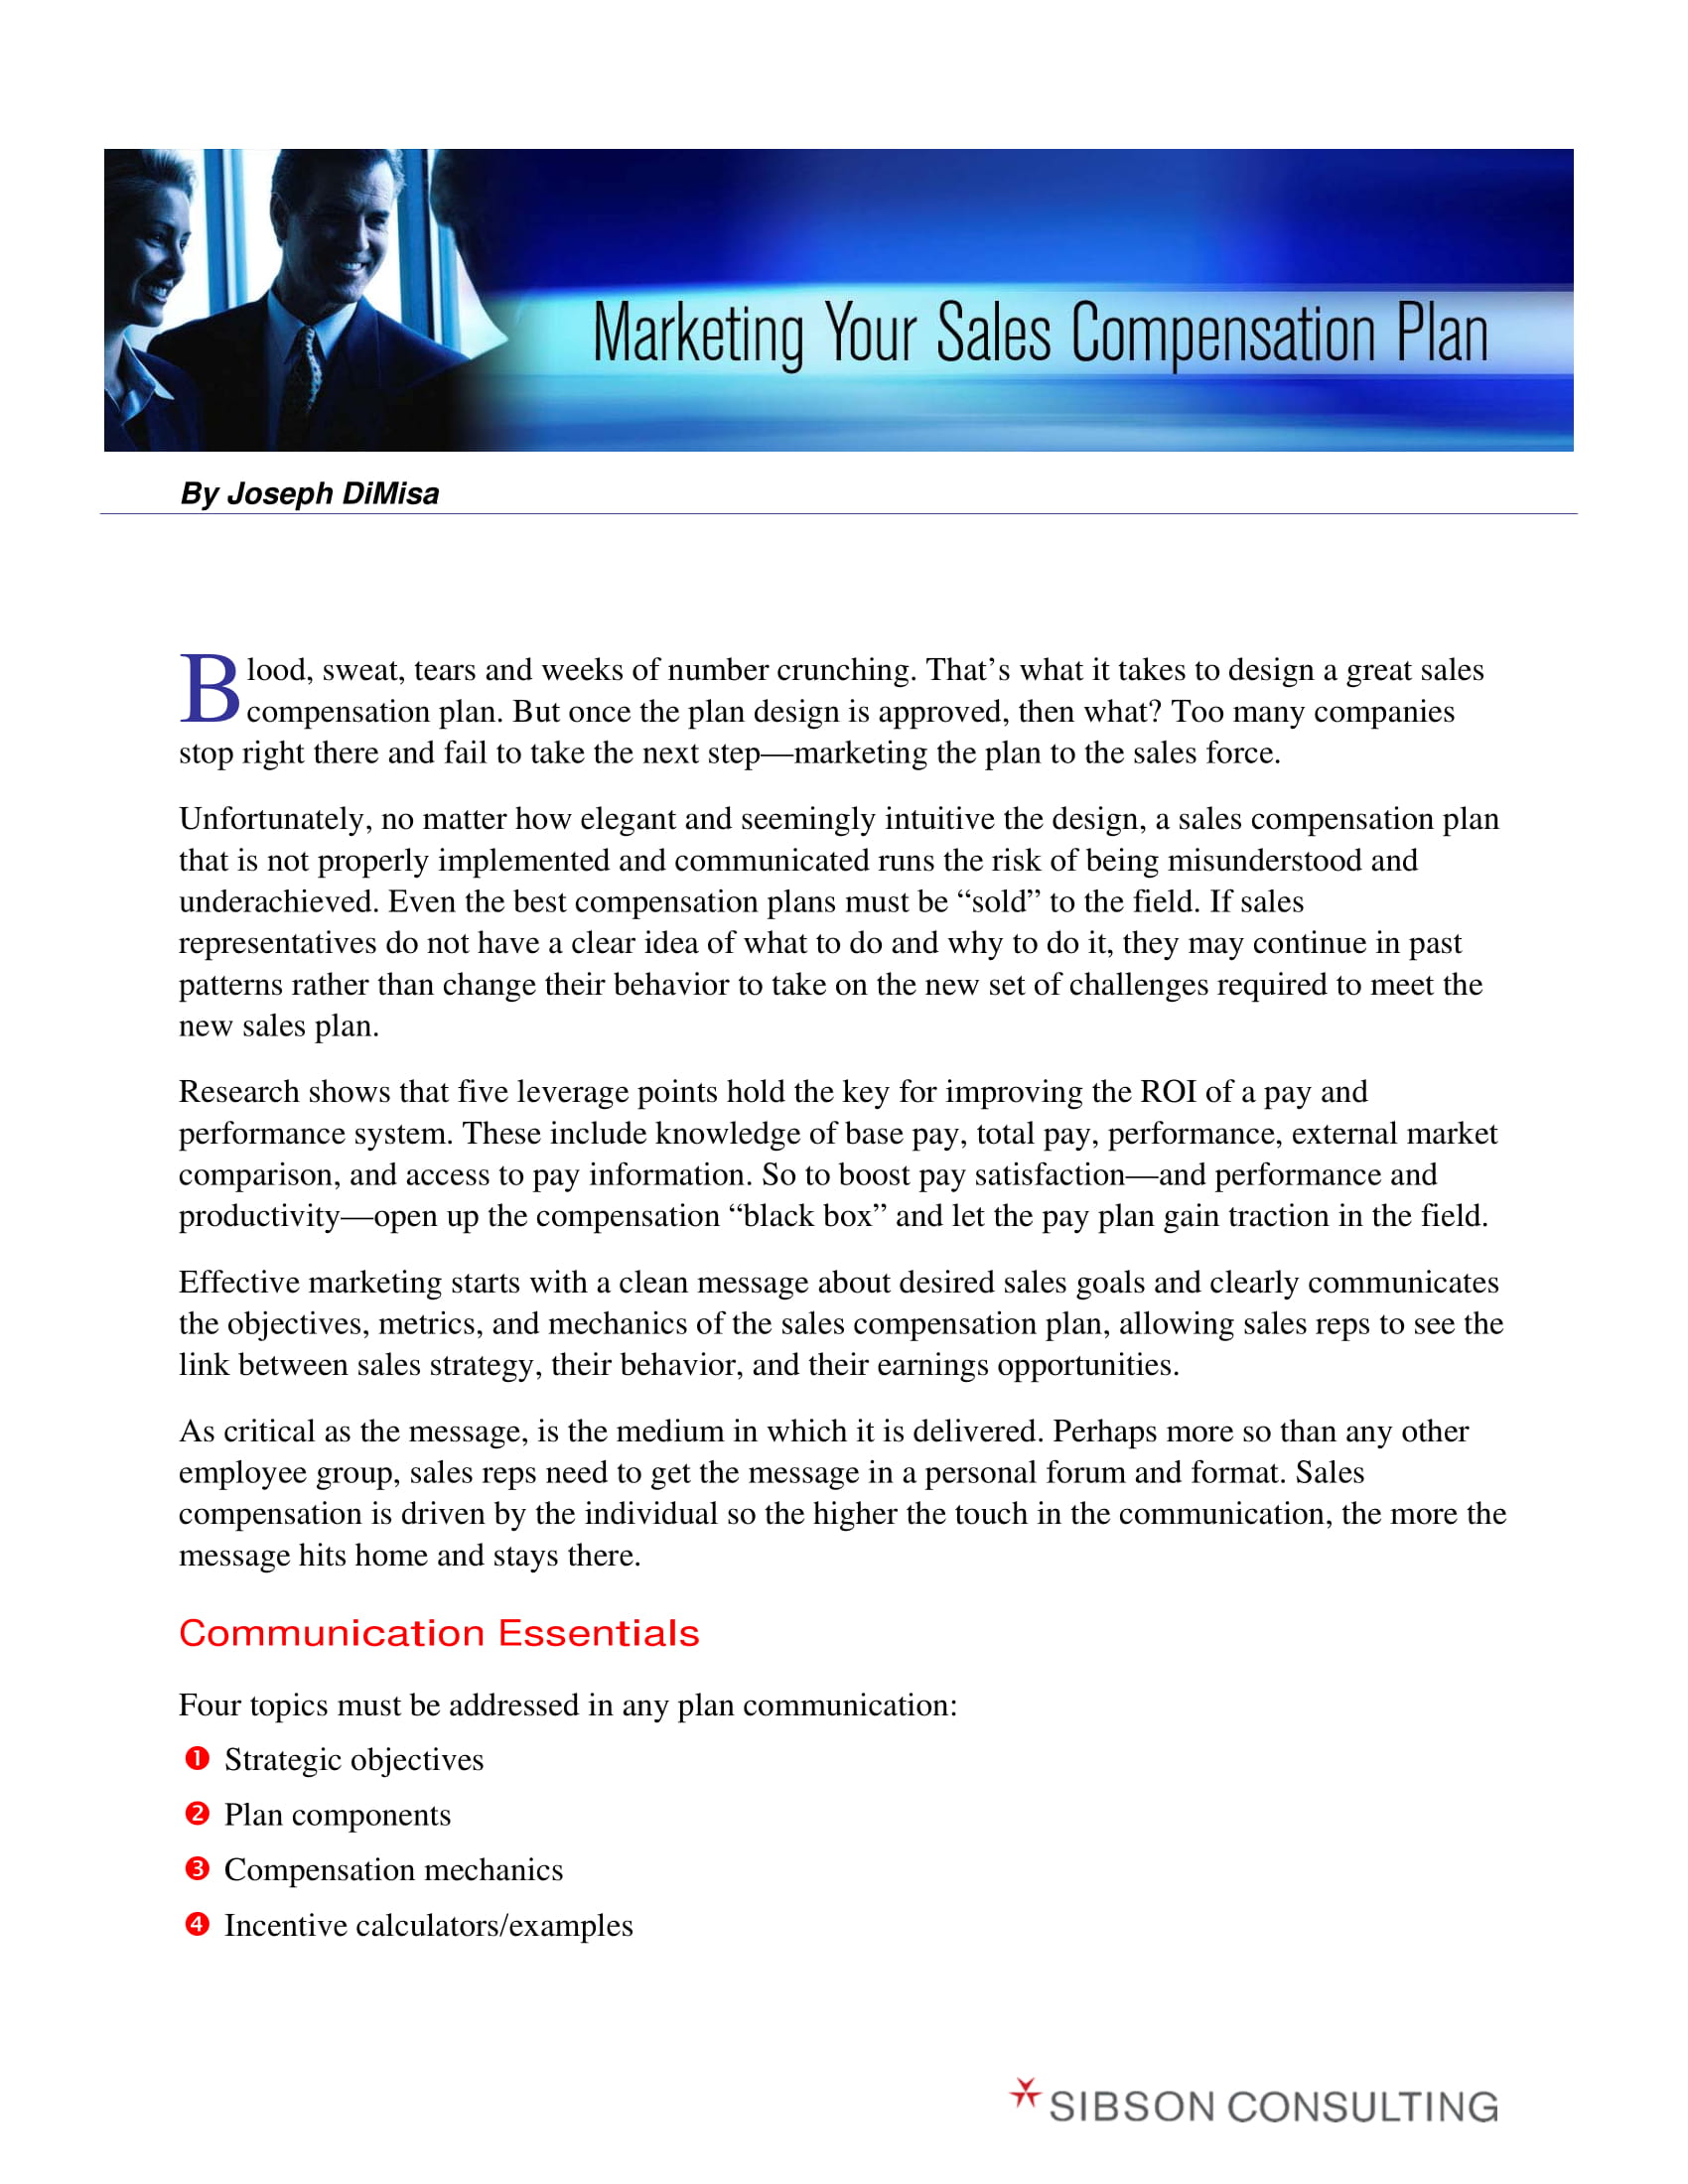 Sales Compensation Plan - 14+ Examples, Format, Pdf, Useful Tips